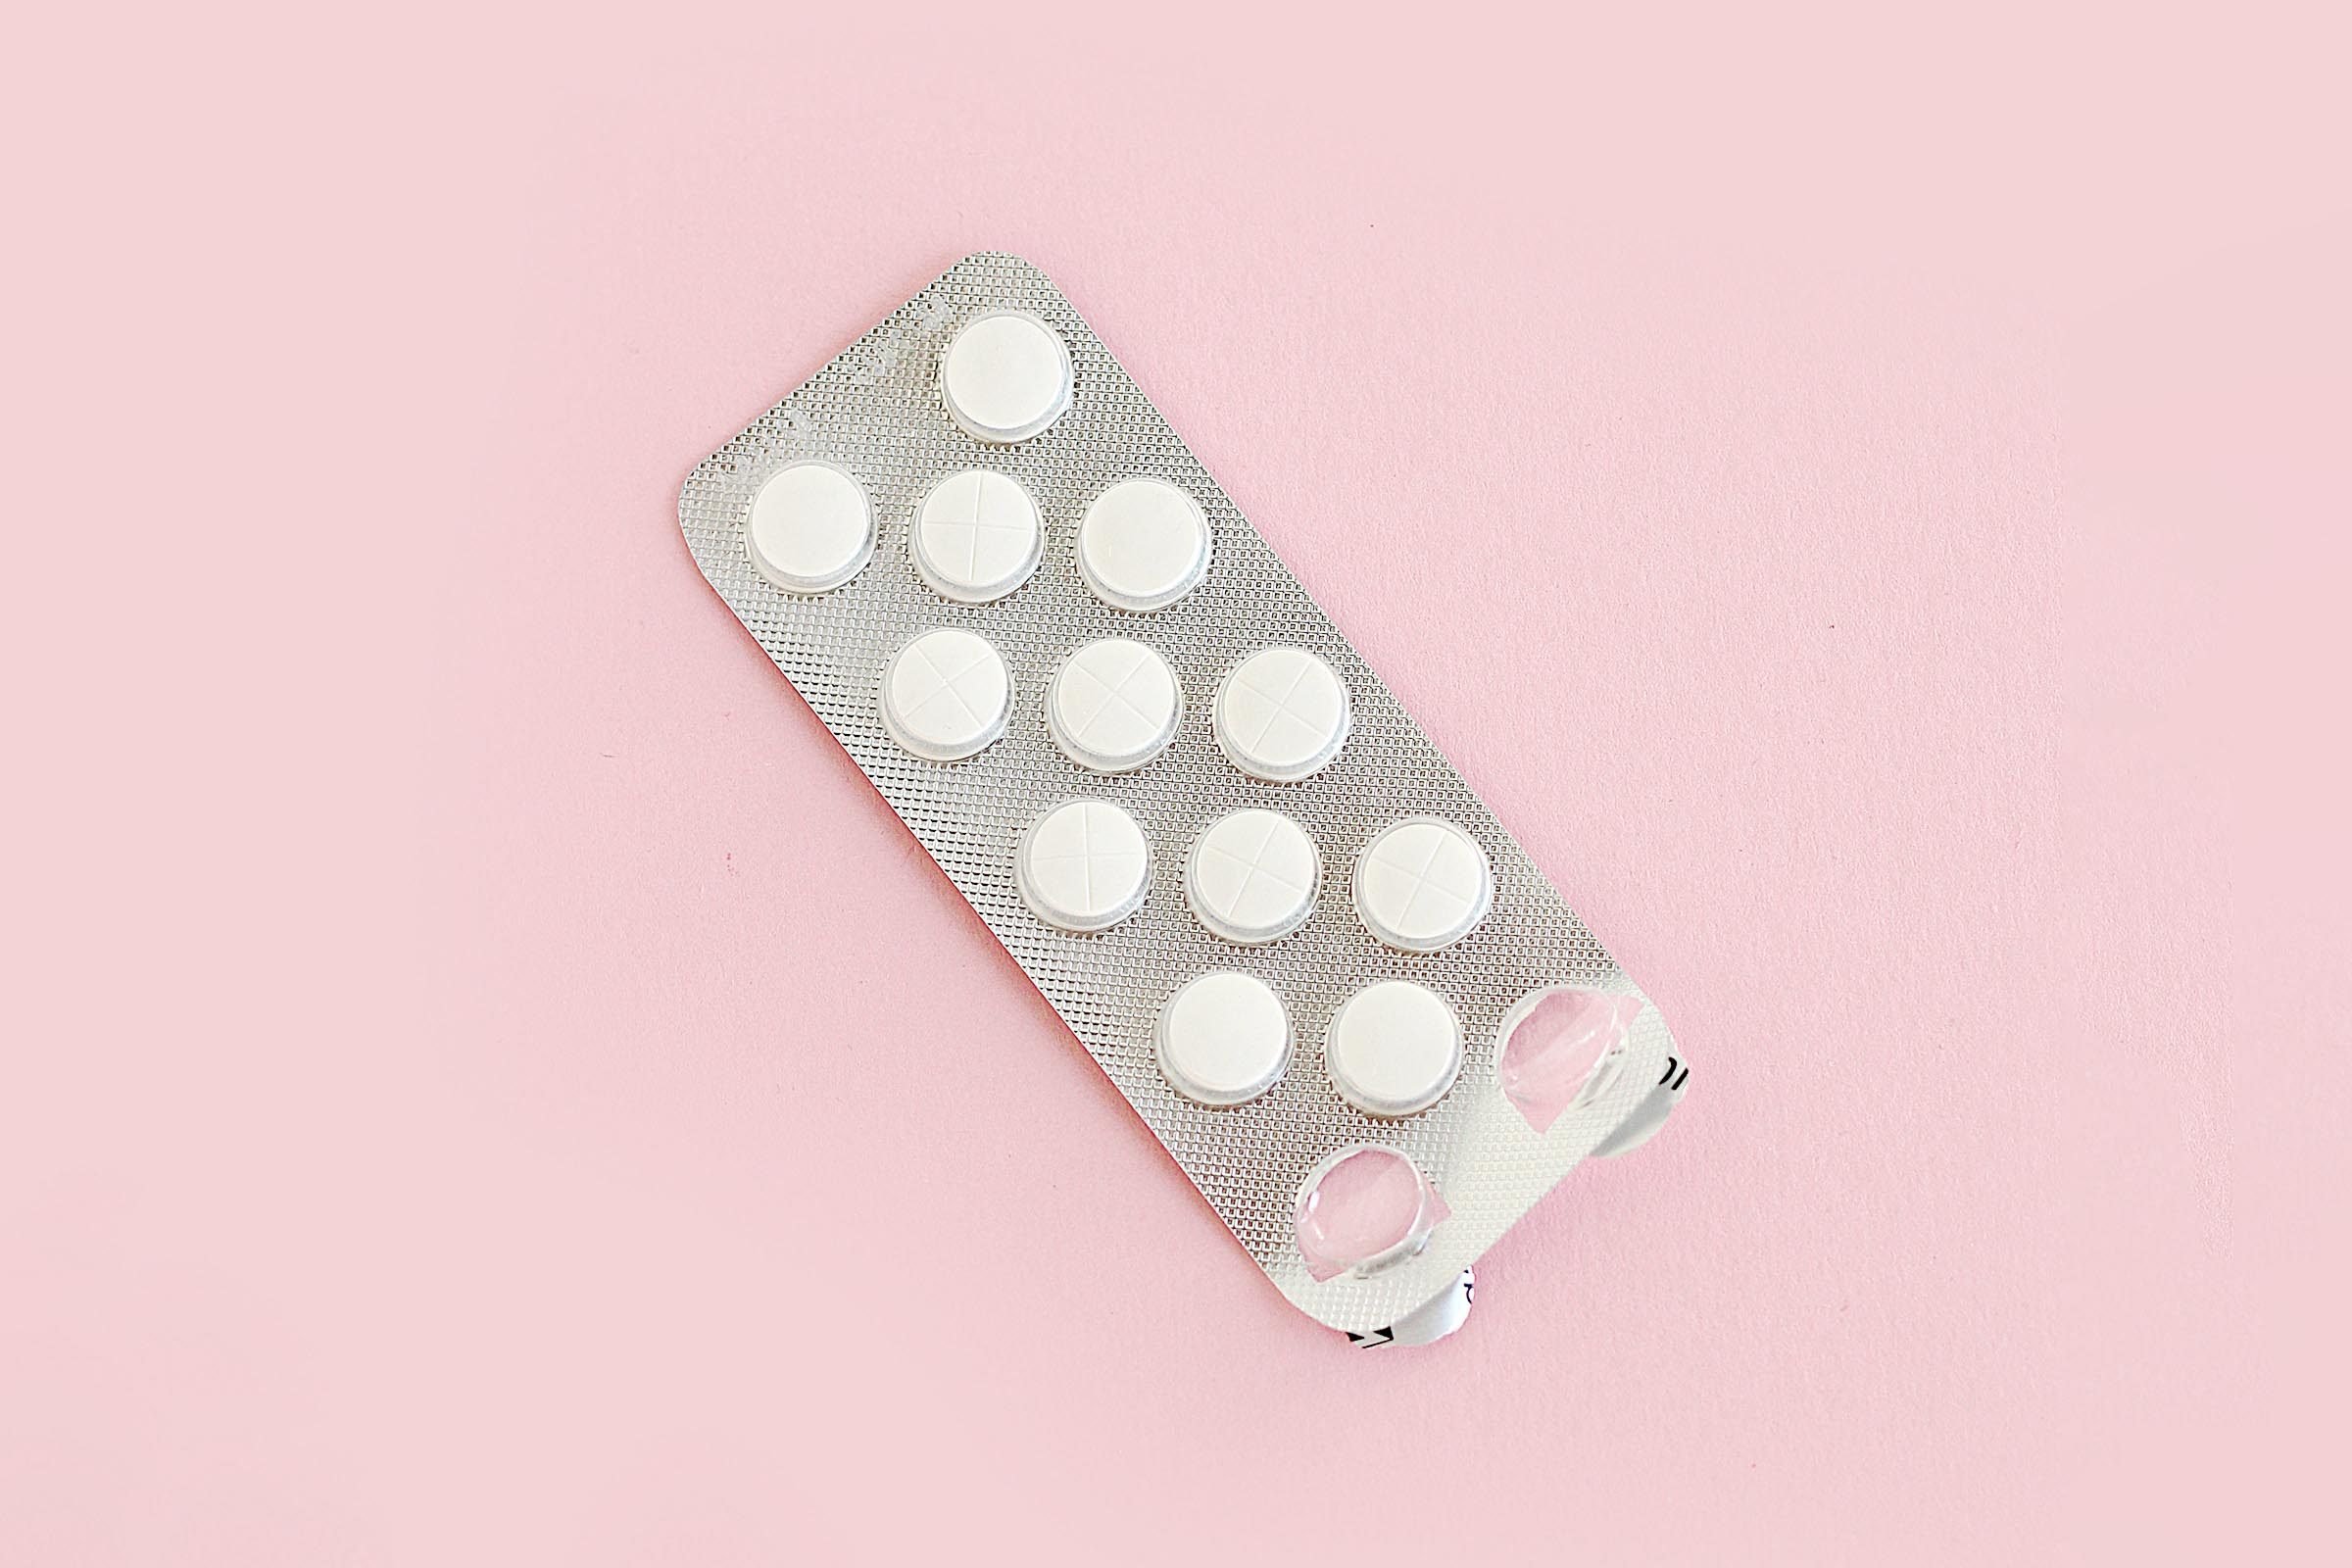 blister pills on a pink background